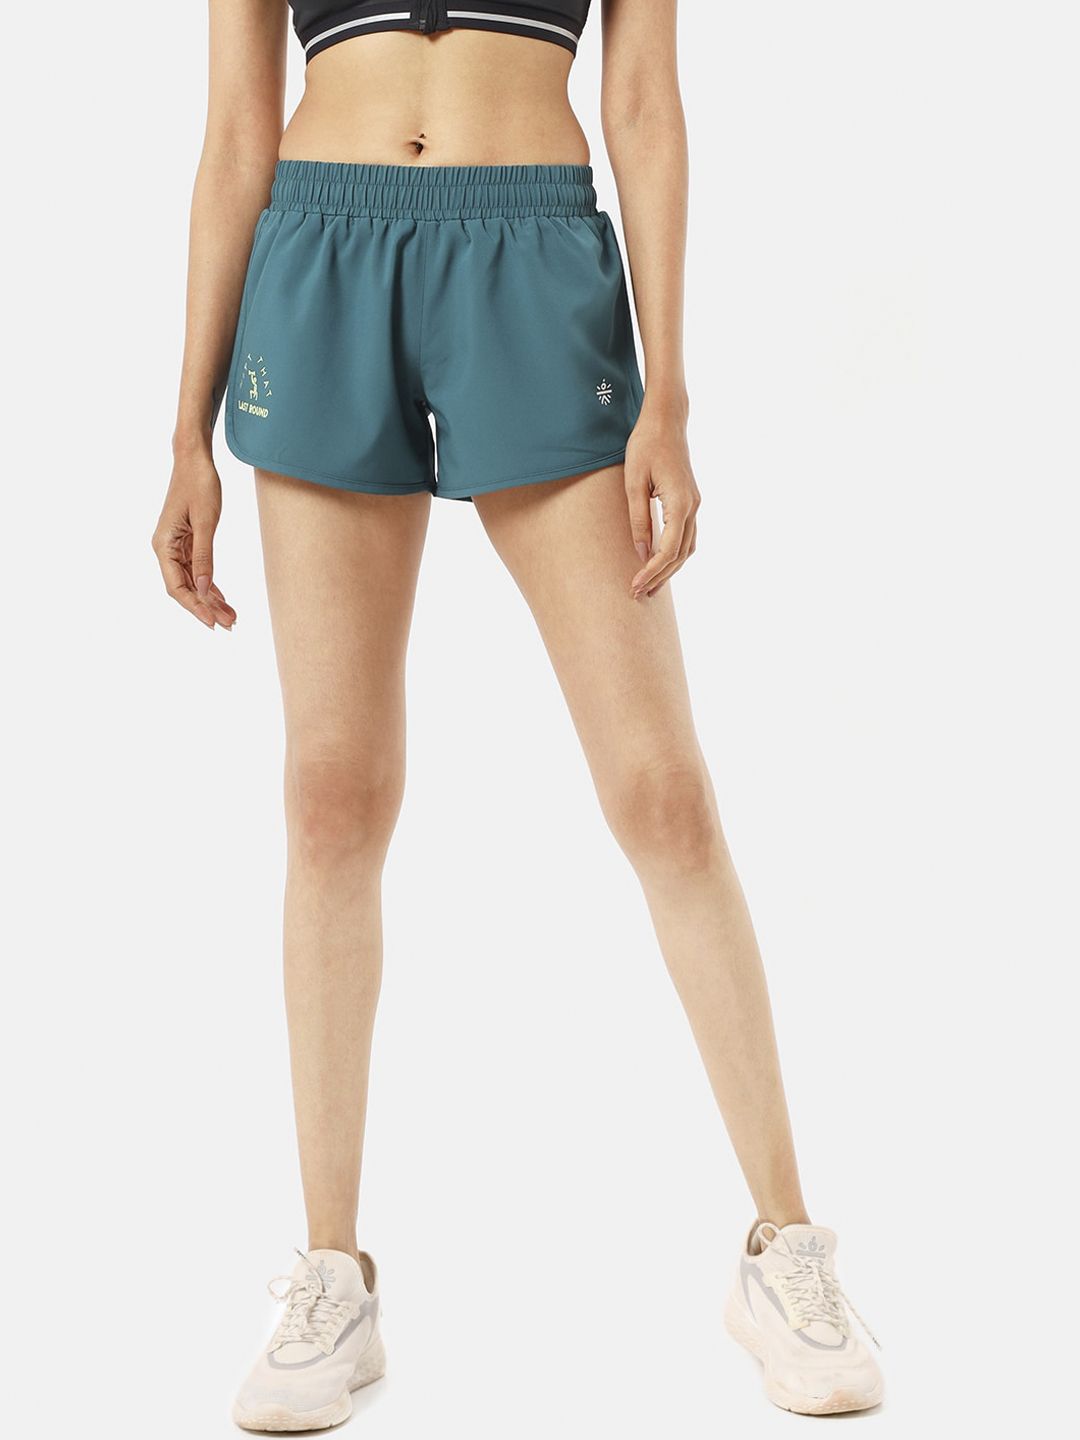 Cultsport Women Teal Mid-Rise Training or Gym Sports Shorts Price in India